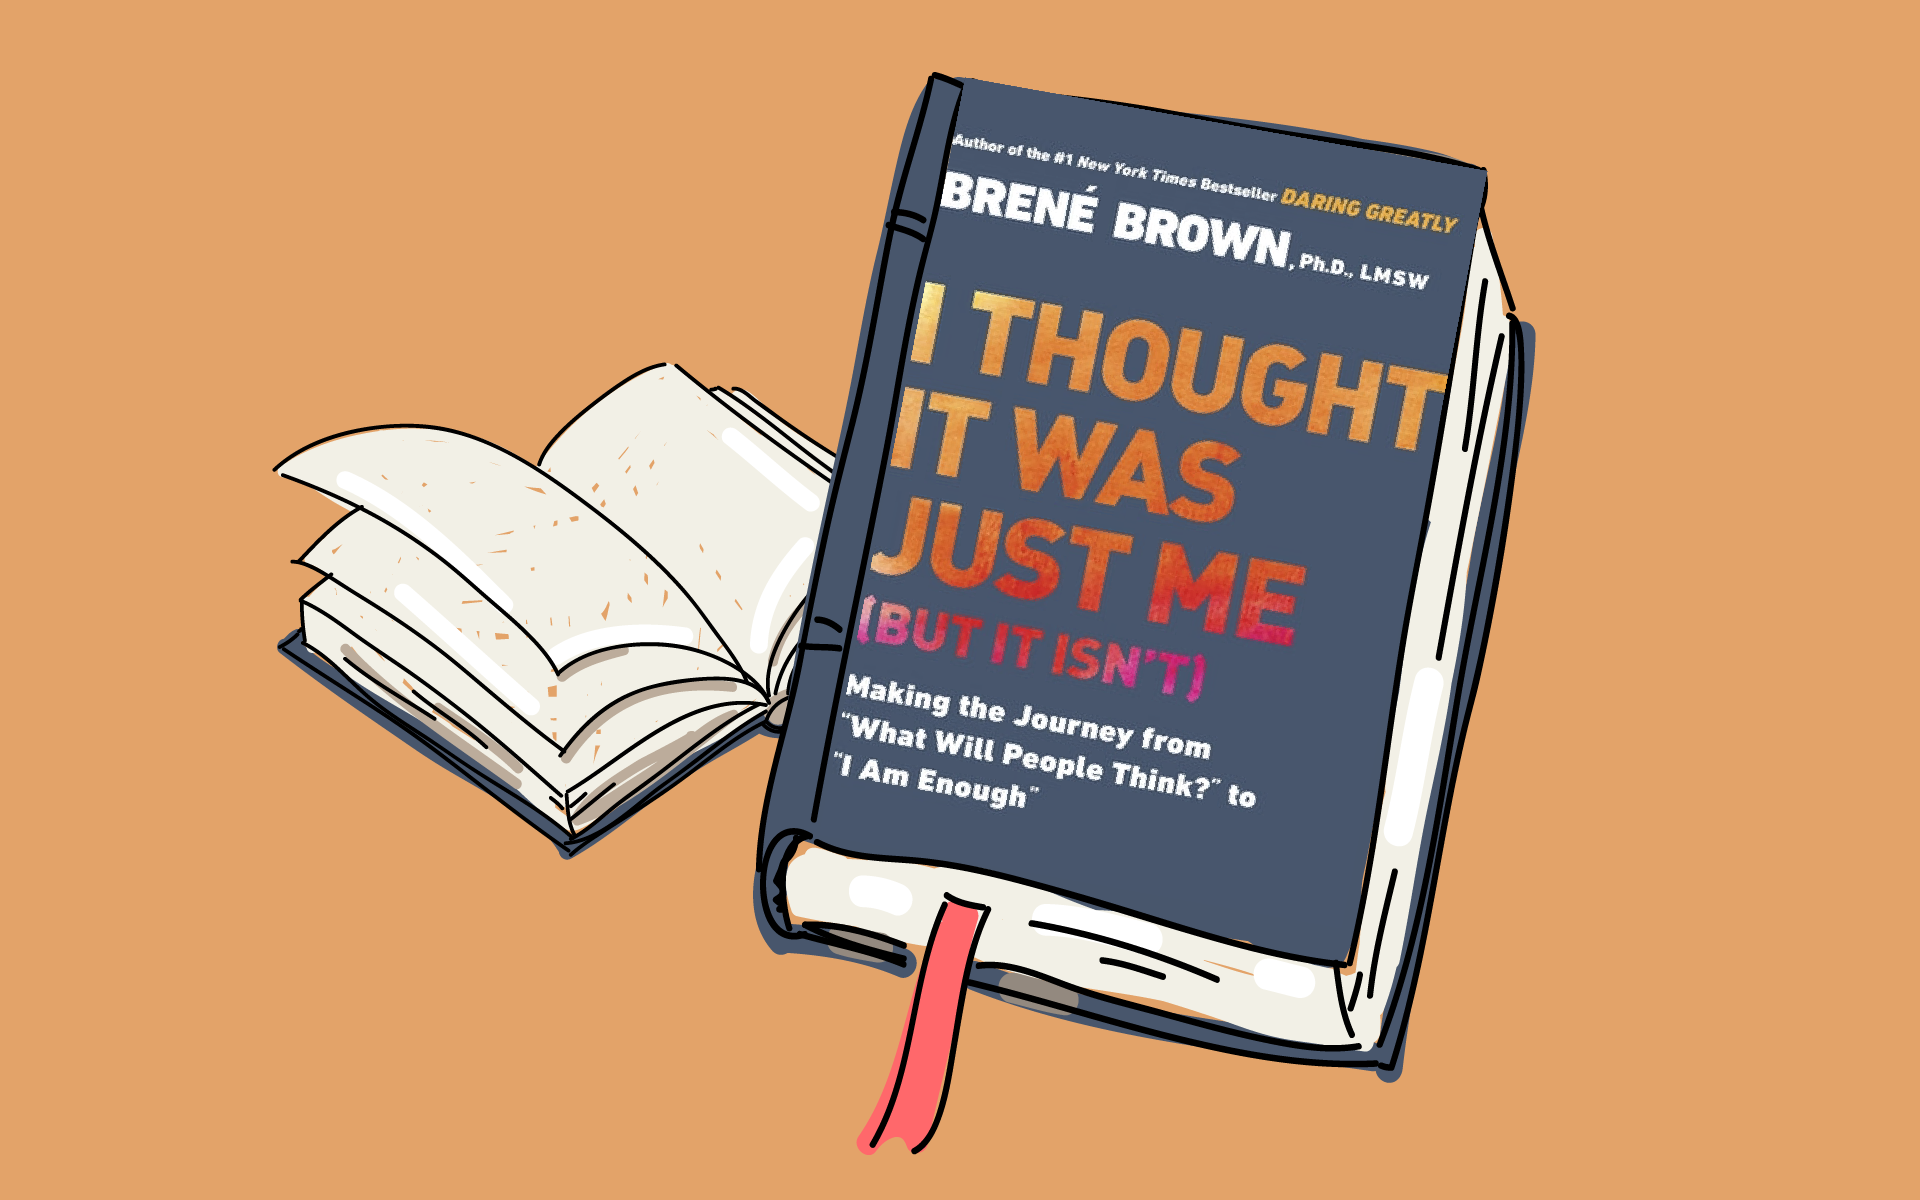 ”I thought it was just me (but it isn’t)”, by Brené Brown